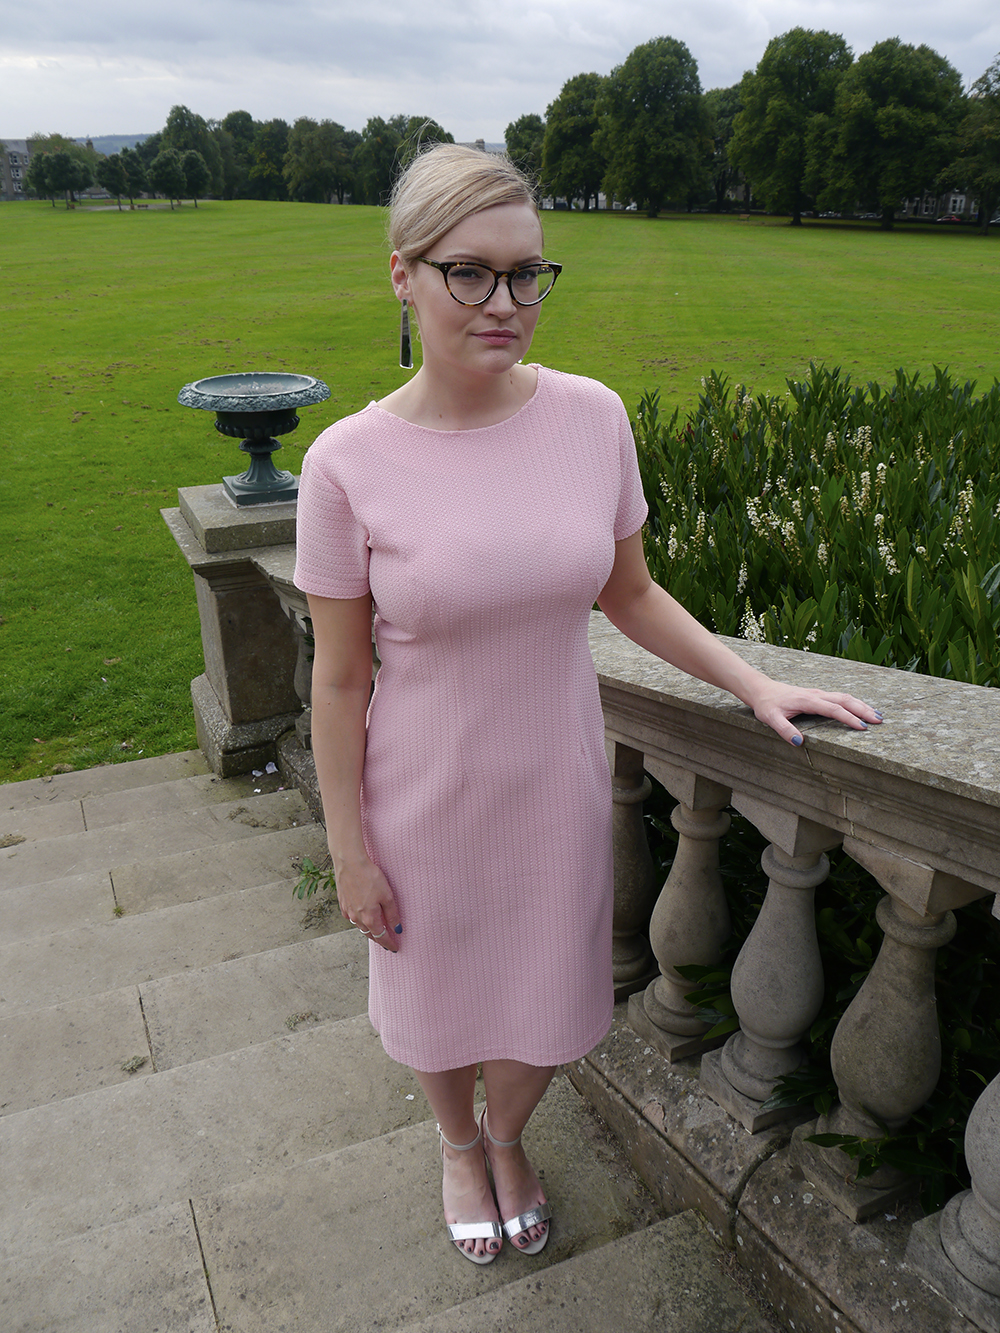 Wardrobe Conversations, Kimberley, styled by kimberley, candy pink sixties dress, vintage weigh and pay, dundee blogger, edinburgh blogger, scottish style blogger, vintage style scotland